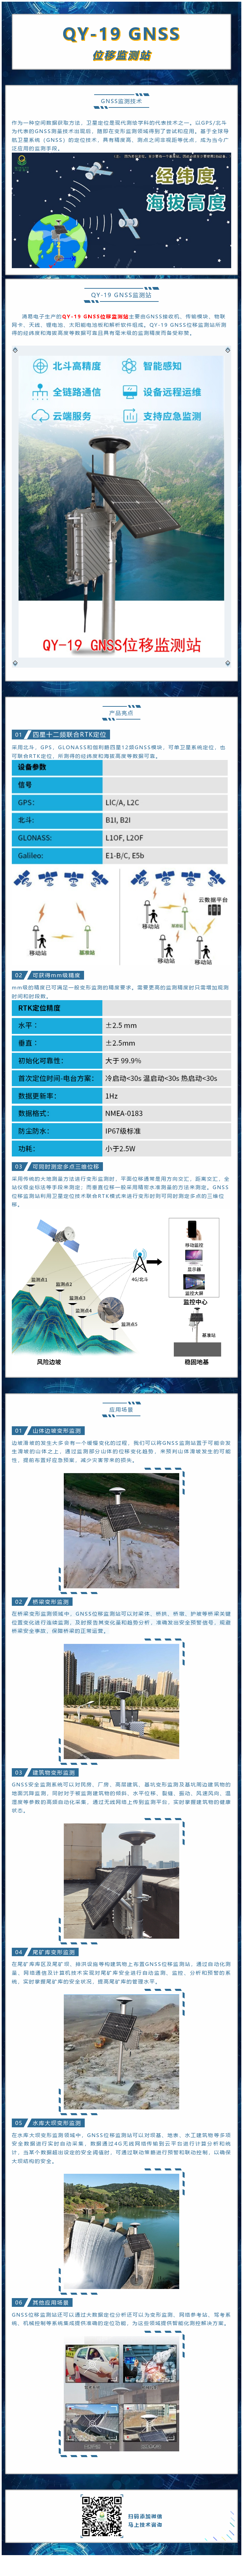 GNSS 邯鄲.png